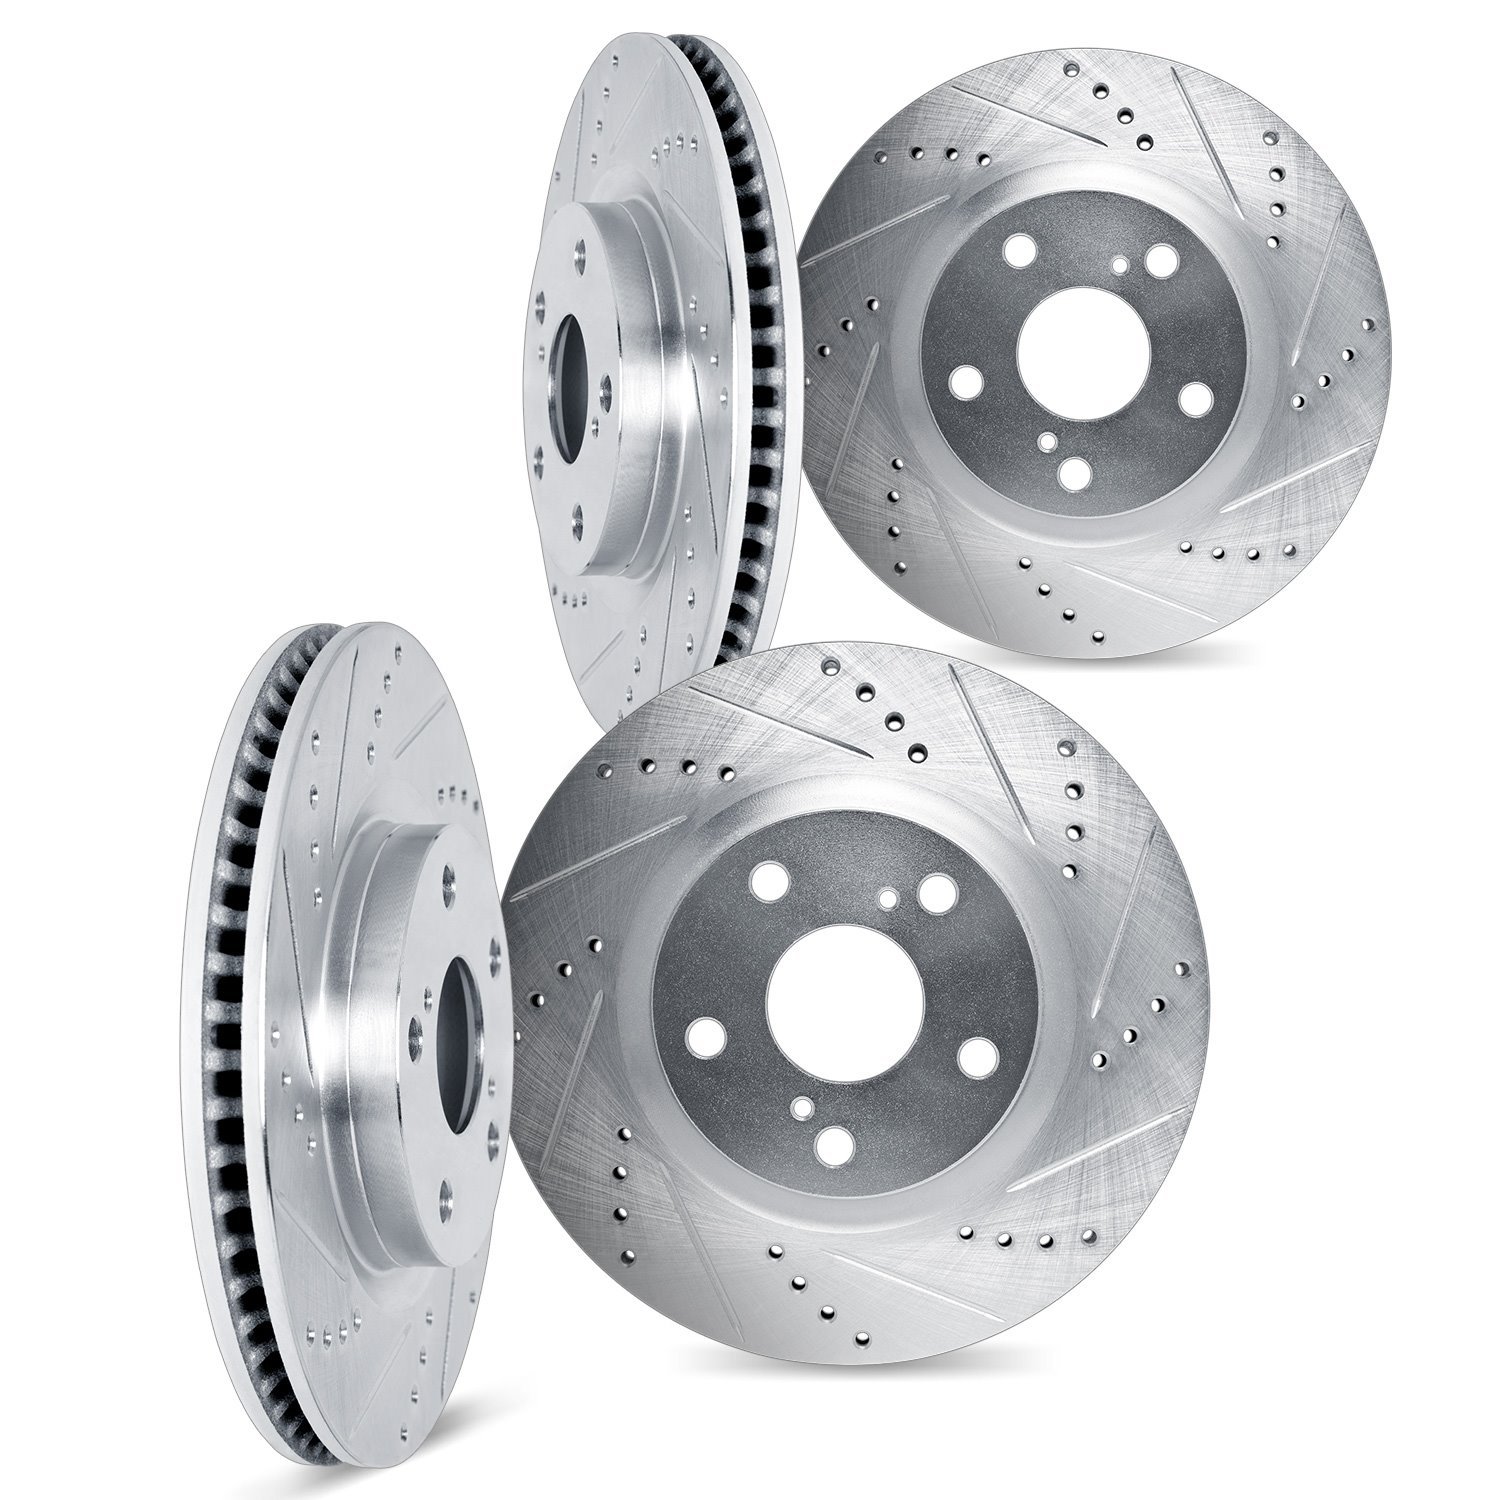 7004-76130 Drilled/Slotted Brake Rotors [Silver], 1991-1996 Lexus/Toyota/Scion, Position: Front and Rear